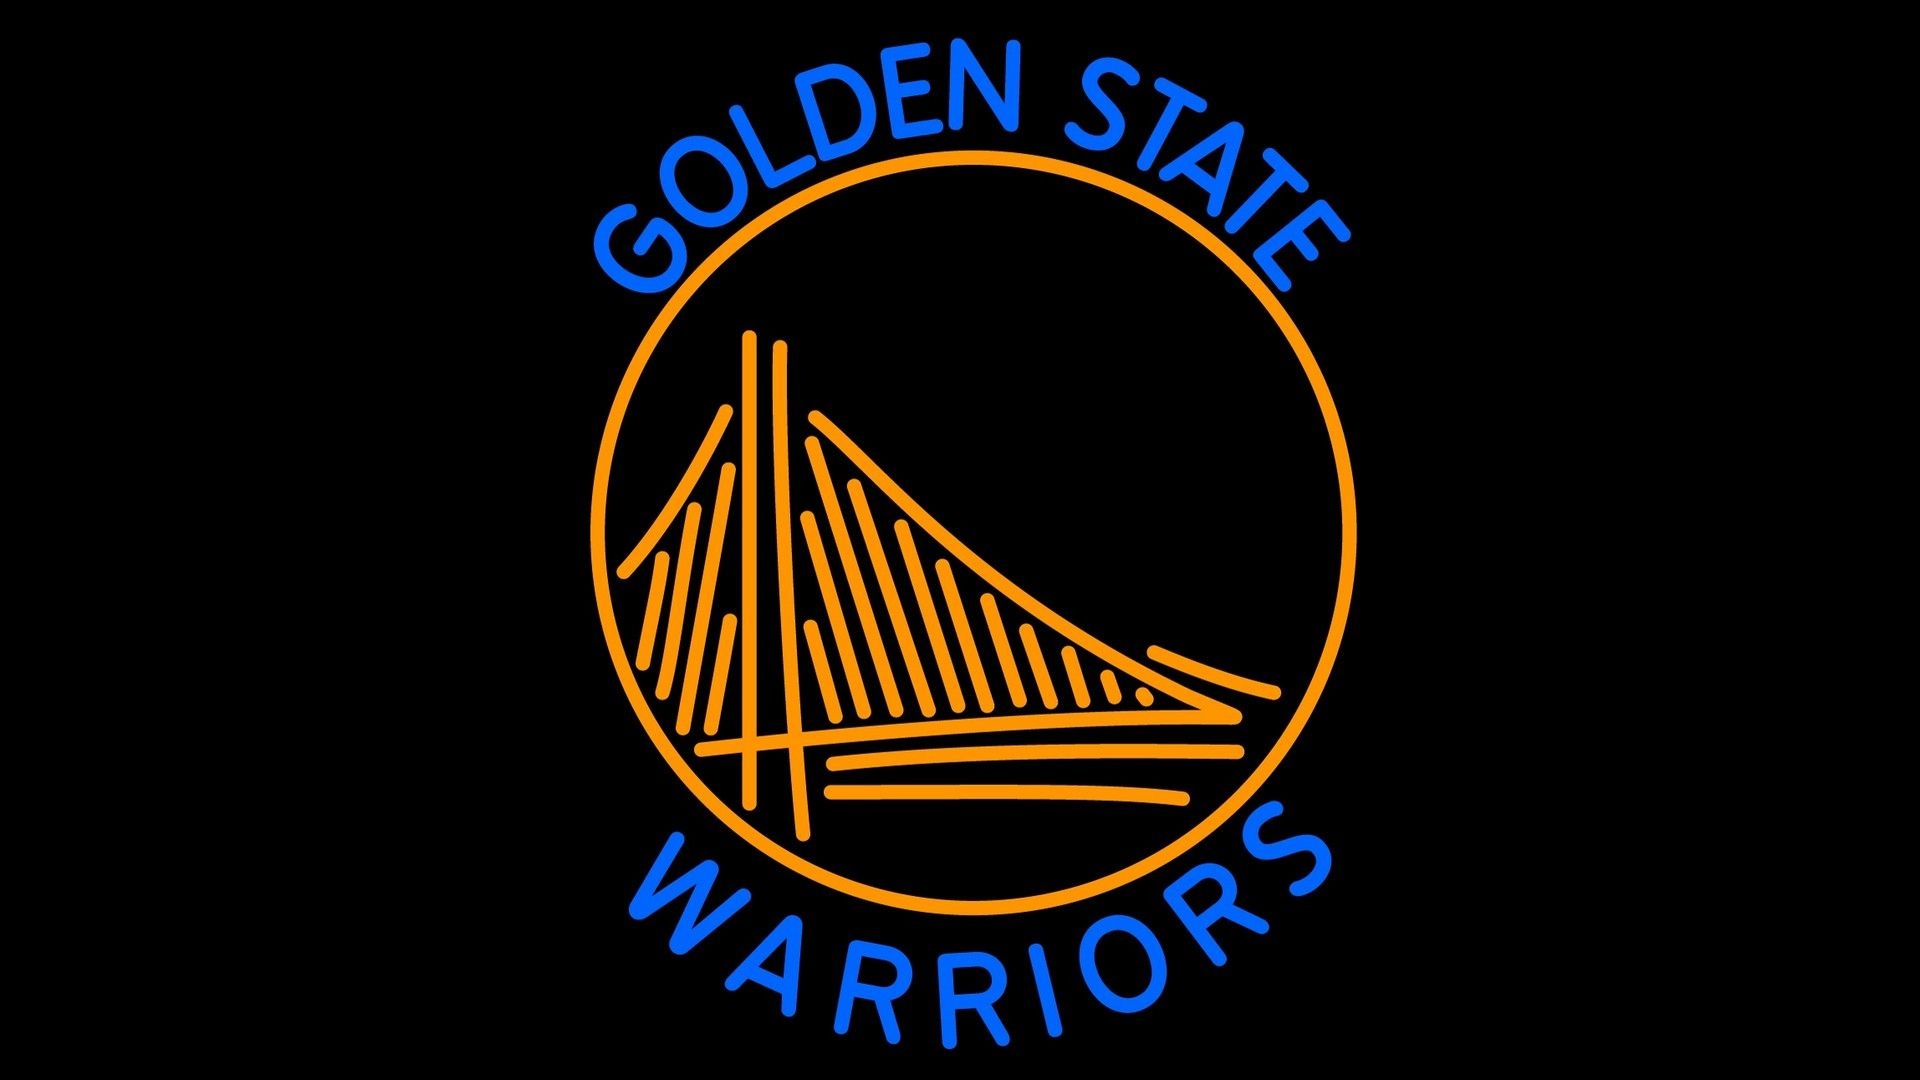 GSW wallpapers, collection, 1920x1080 Full HD Desktop